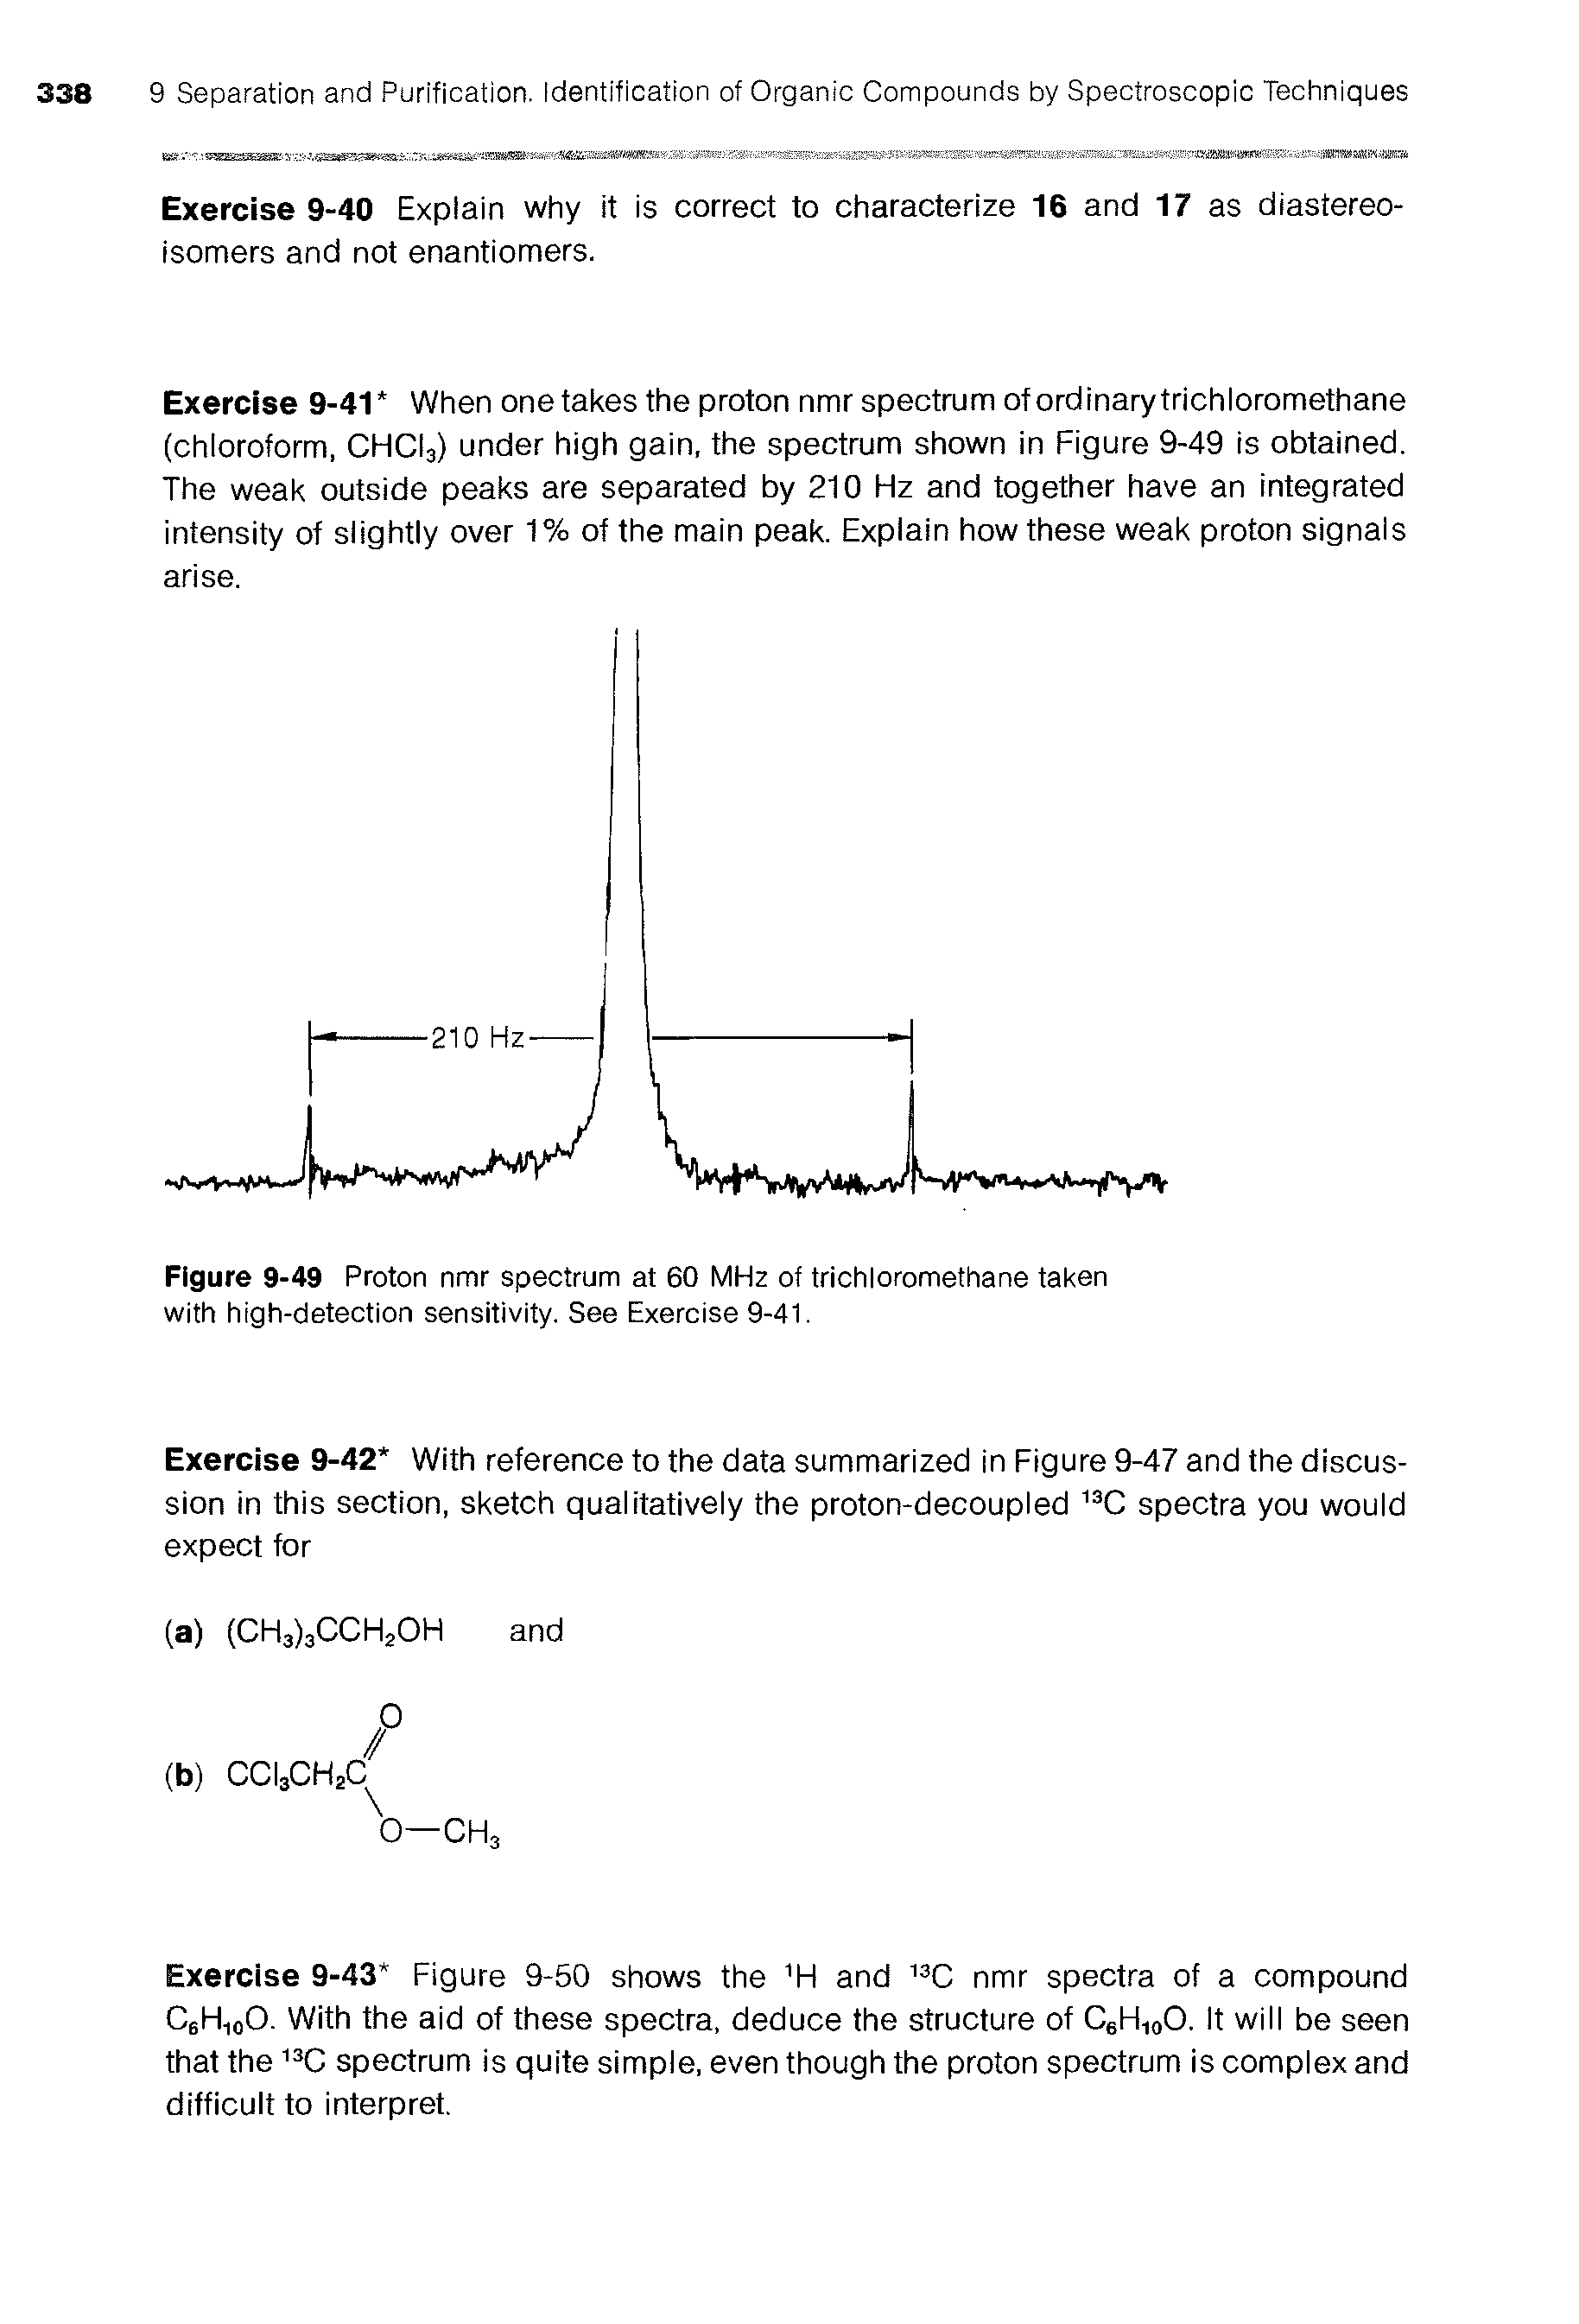 Figure 9-49 Proton nmr spectrum at 60 MHz of trichloromethane taken with high-detection sensitivity. See Exercise 9-41.